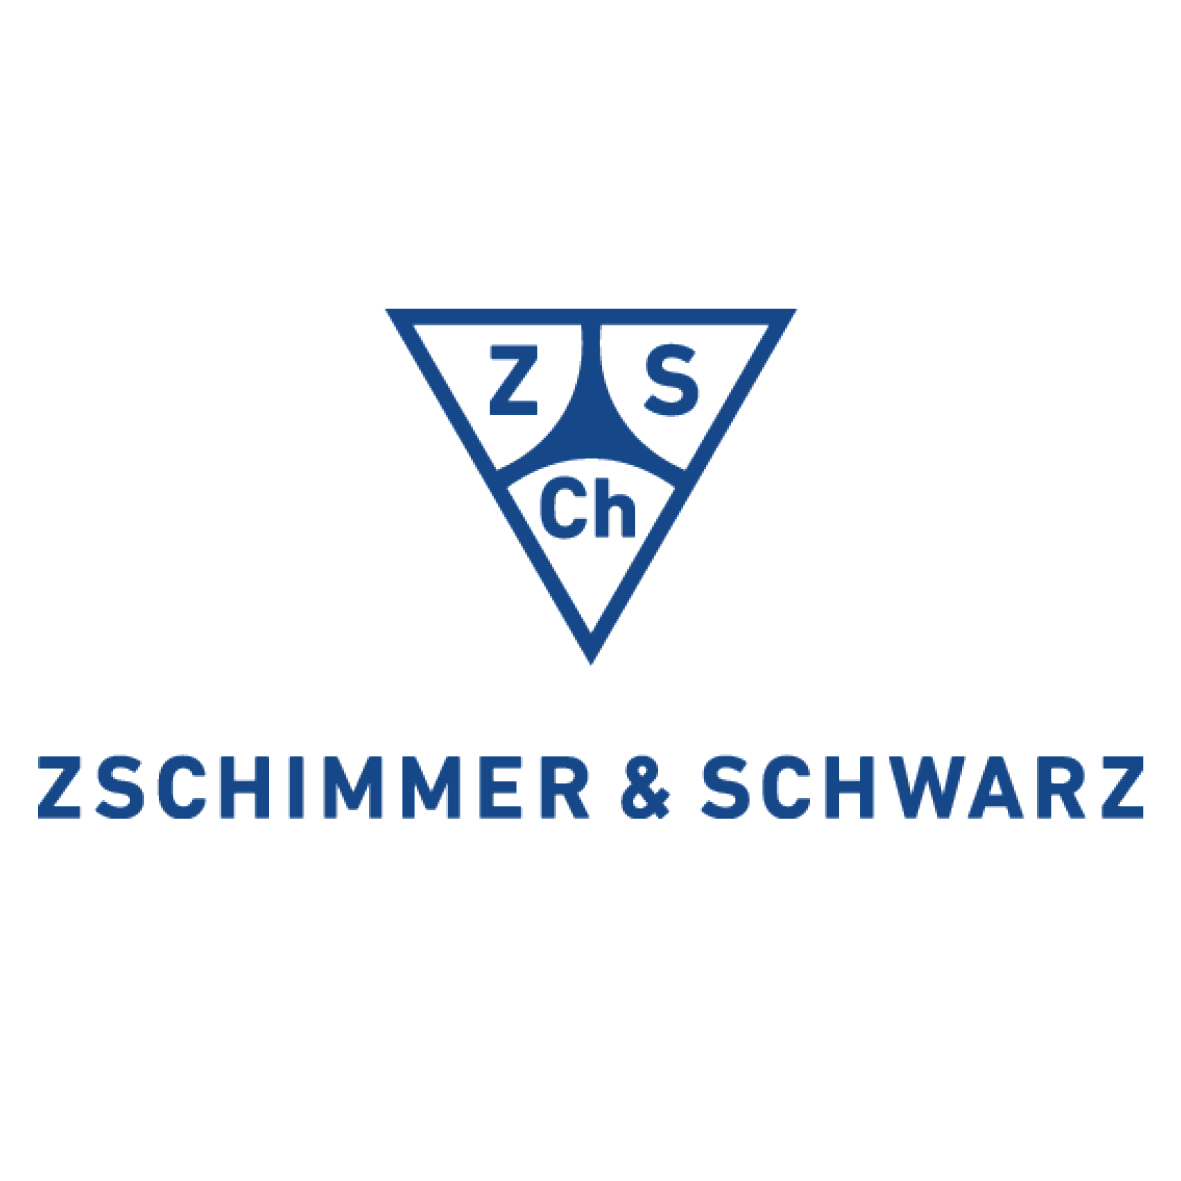 Zschimmer sq.png